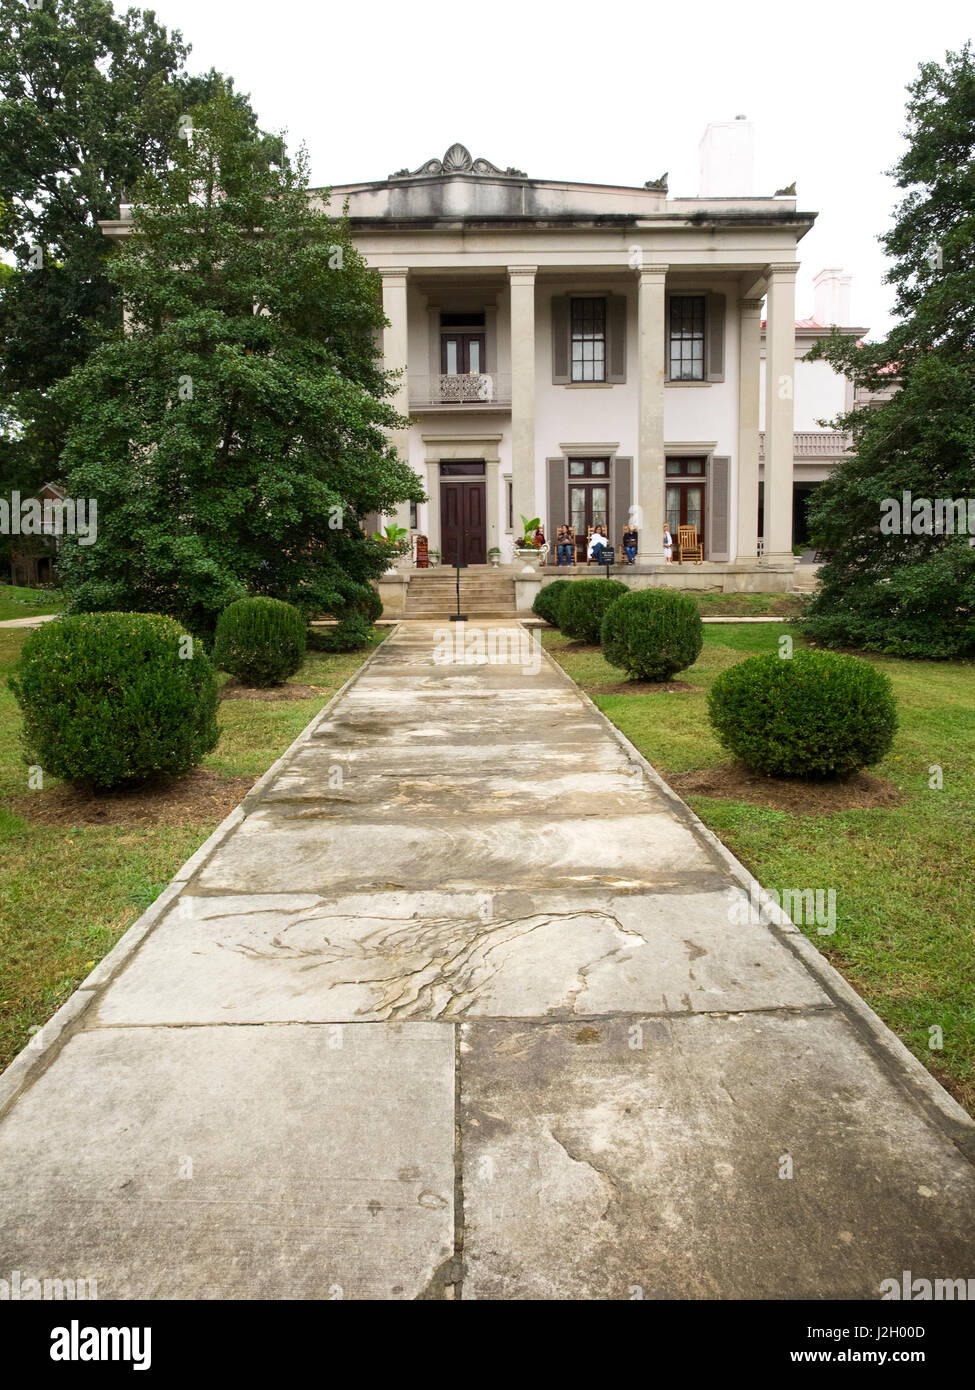 Tennessee, Nashville, Belle Meade Plantation mansion, built in 1853, renowned for breeding thoroughbred racing horses Stock Photo